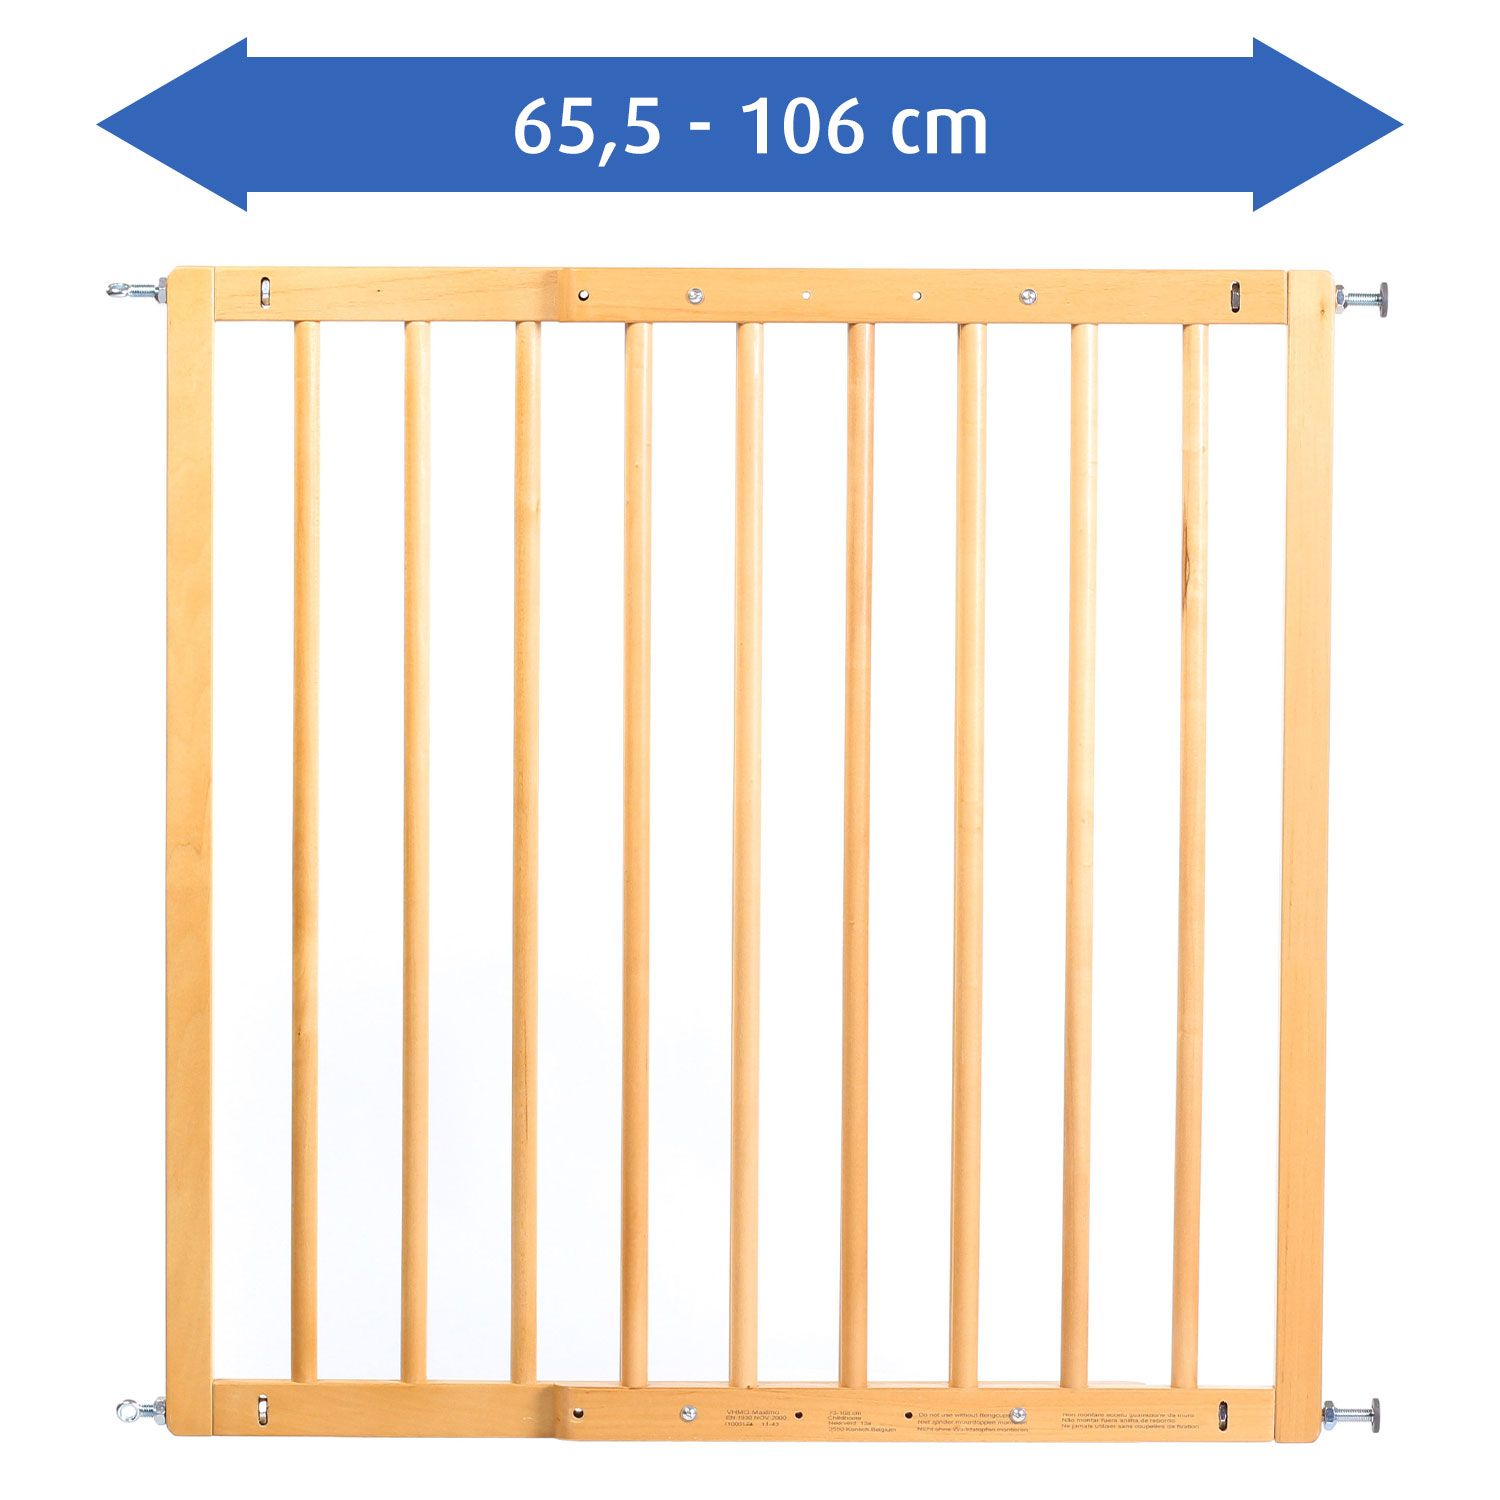 Basic Wall-mounted gate for gateway widths from 65.5 to 106 cm